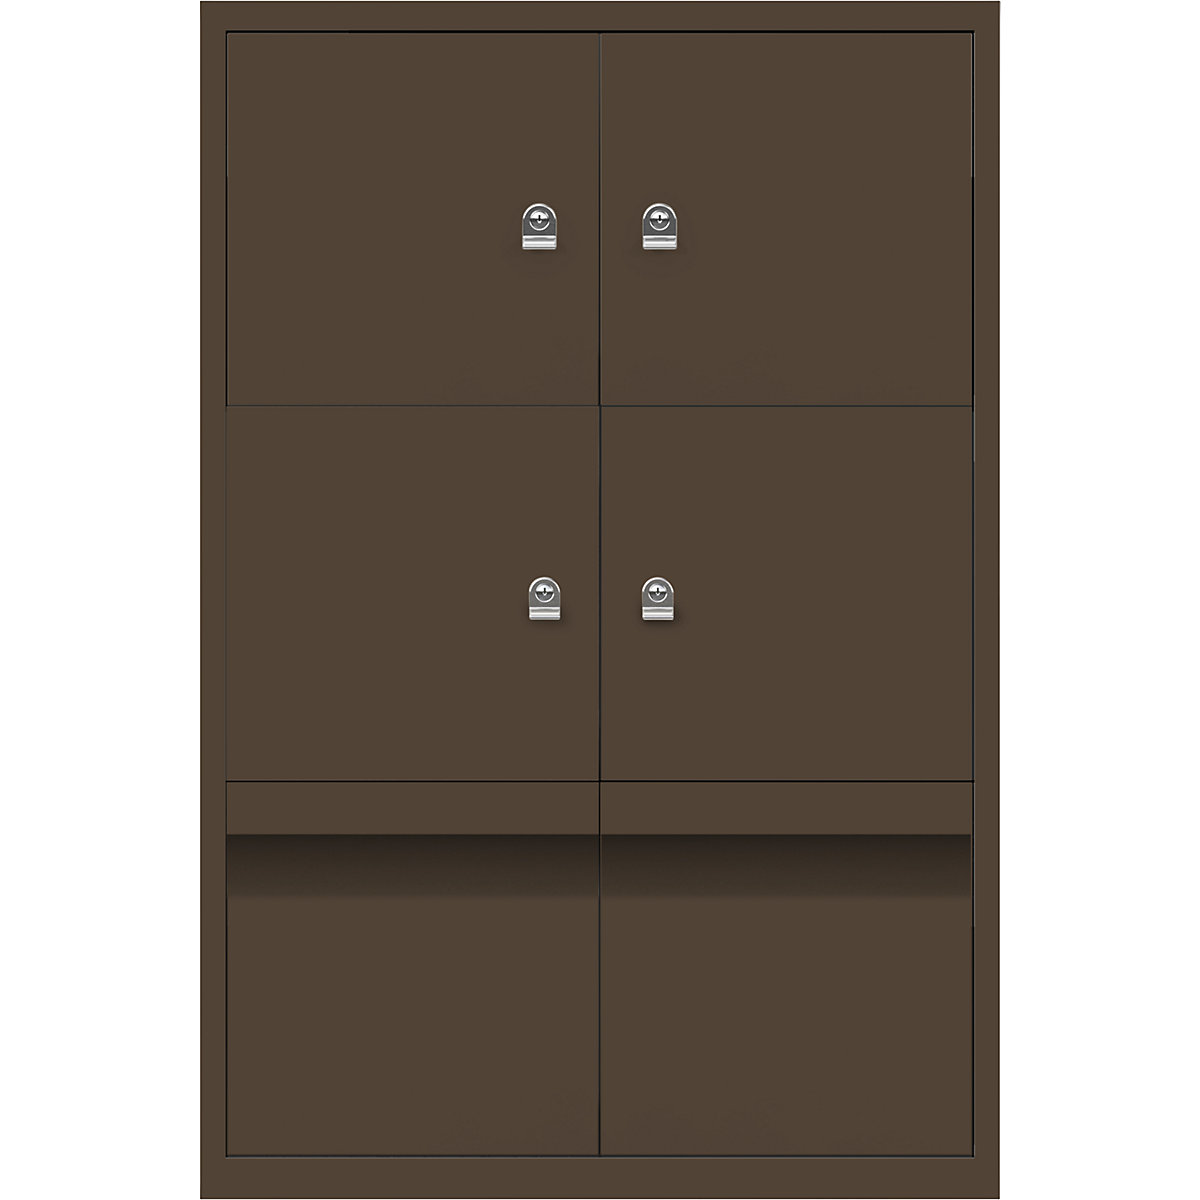 LateralFile™ lodge – BISLEY, with 4 lockable compartments and 2 drawers, height 375 mm each, coffee-3